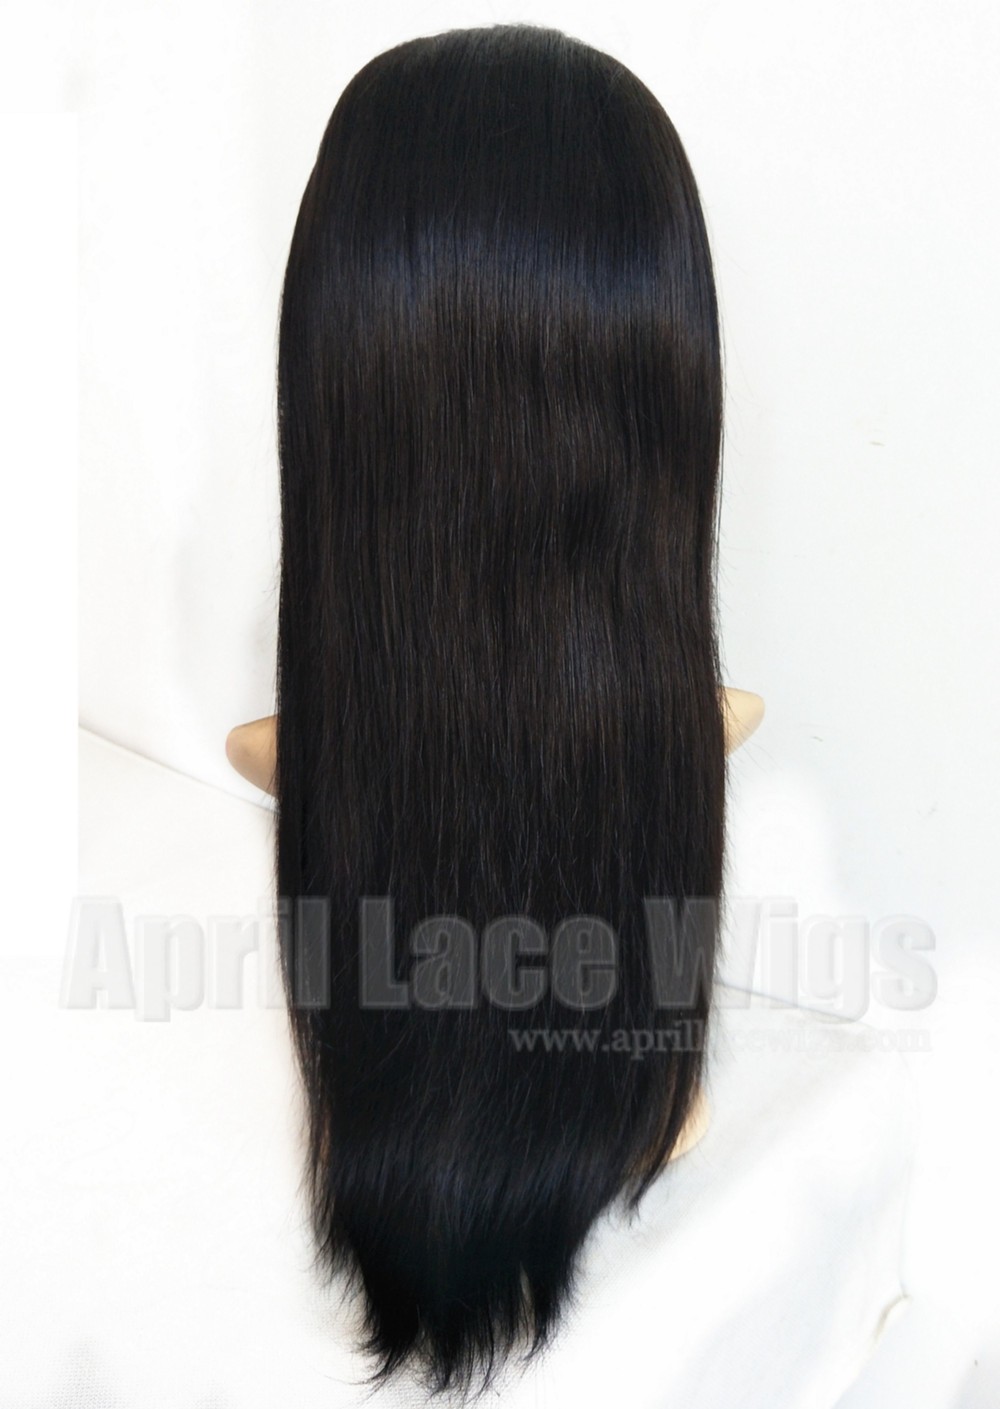  Indian Remy silk straight human hair full lace wig